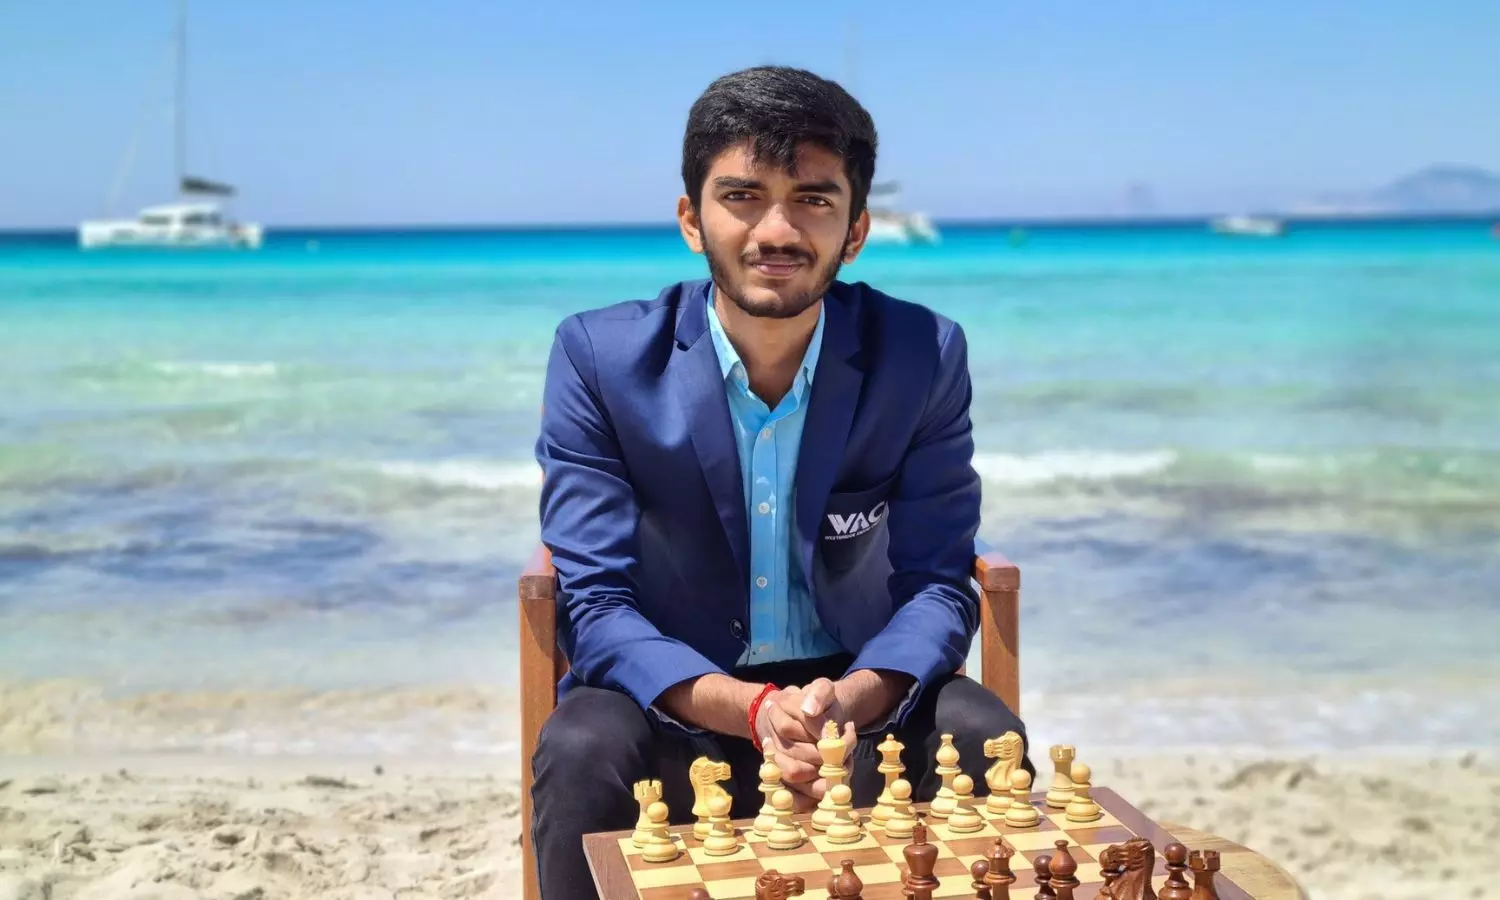 Gukesh overtakes Vishy Anand as India’s highest ranked chess player RITZ